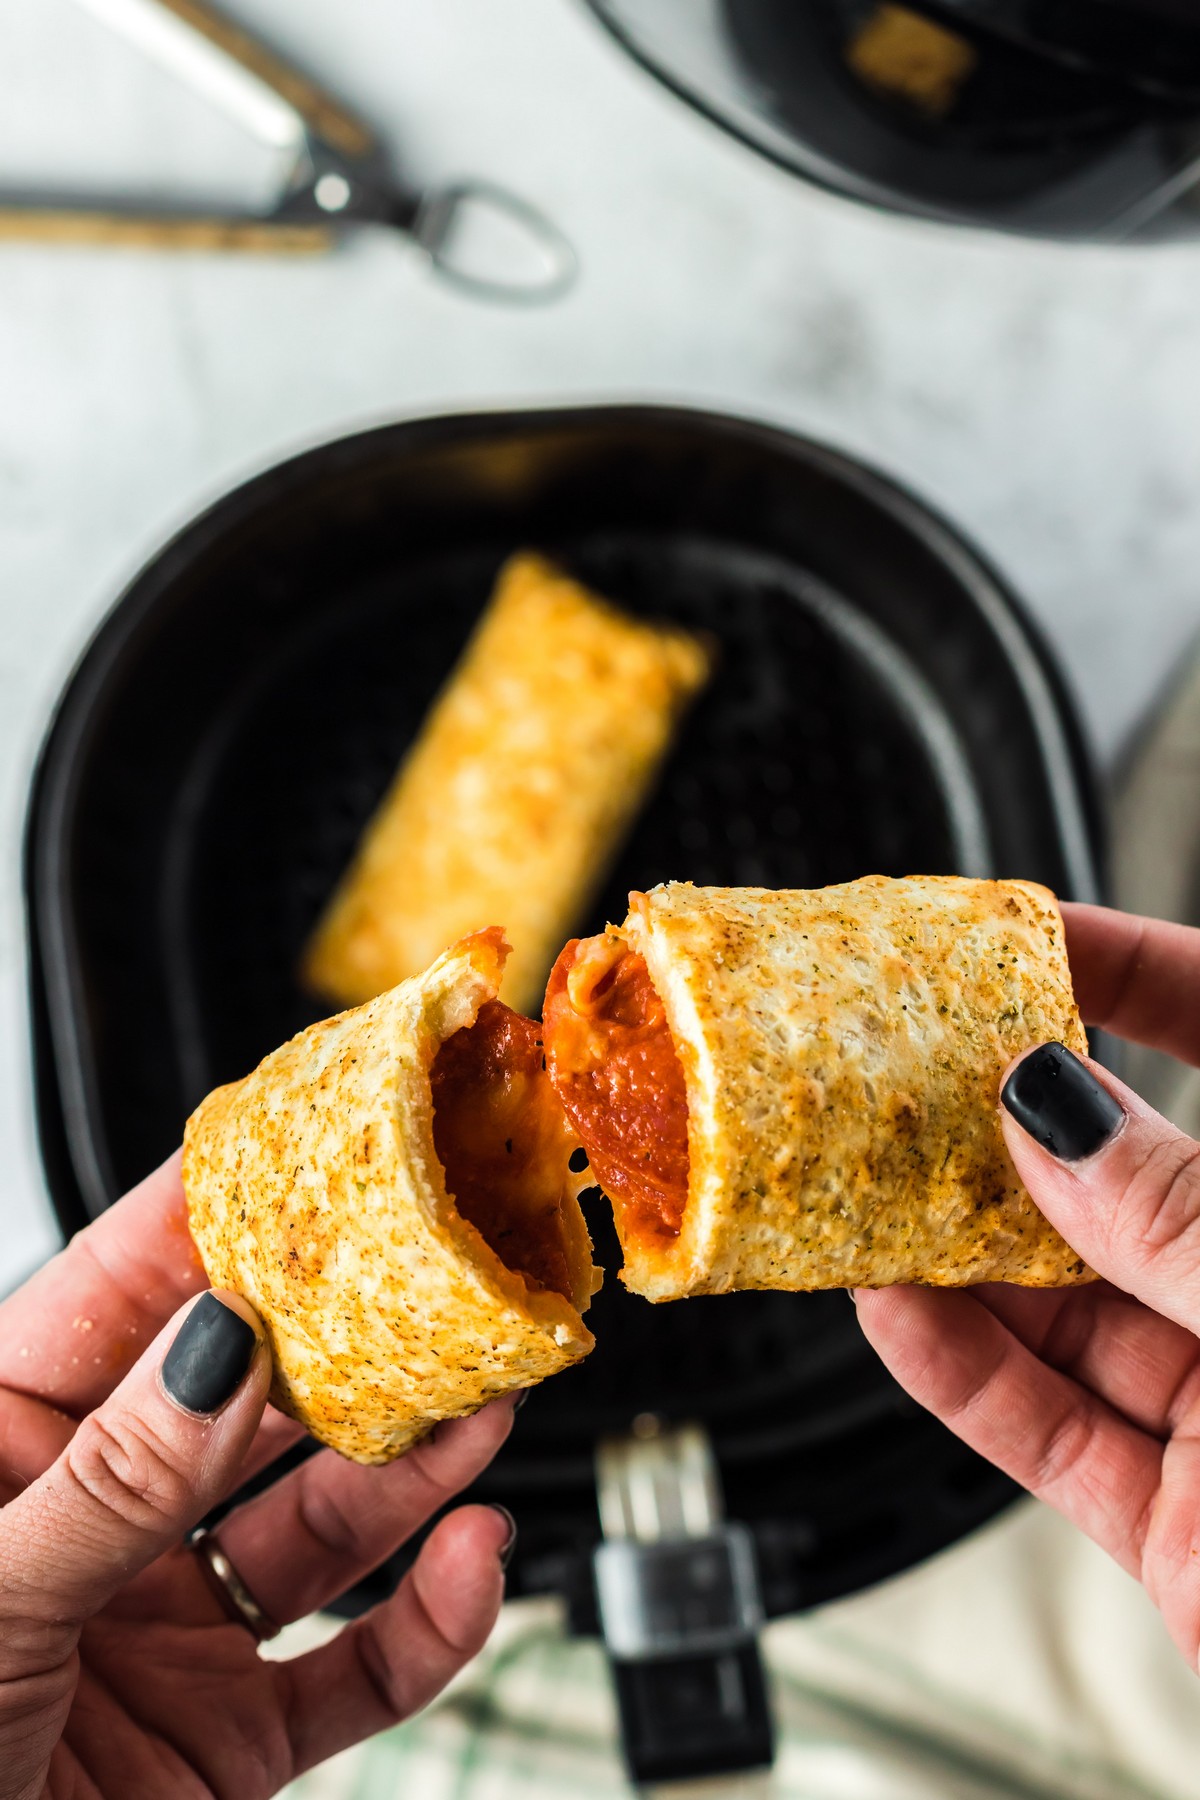 hot pocket from the air fryer